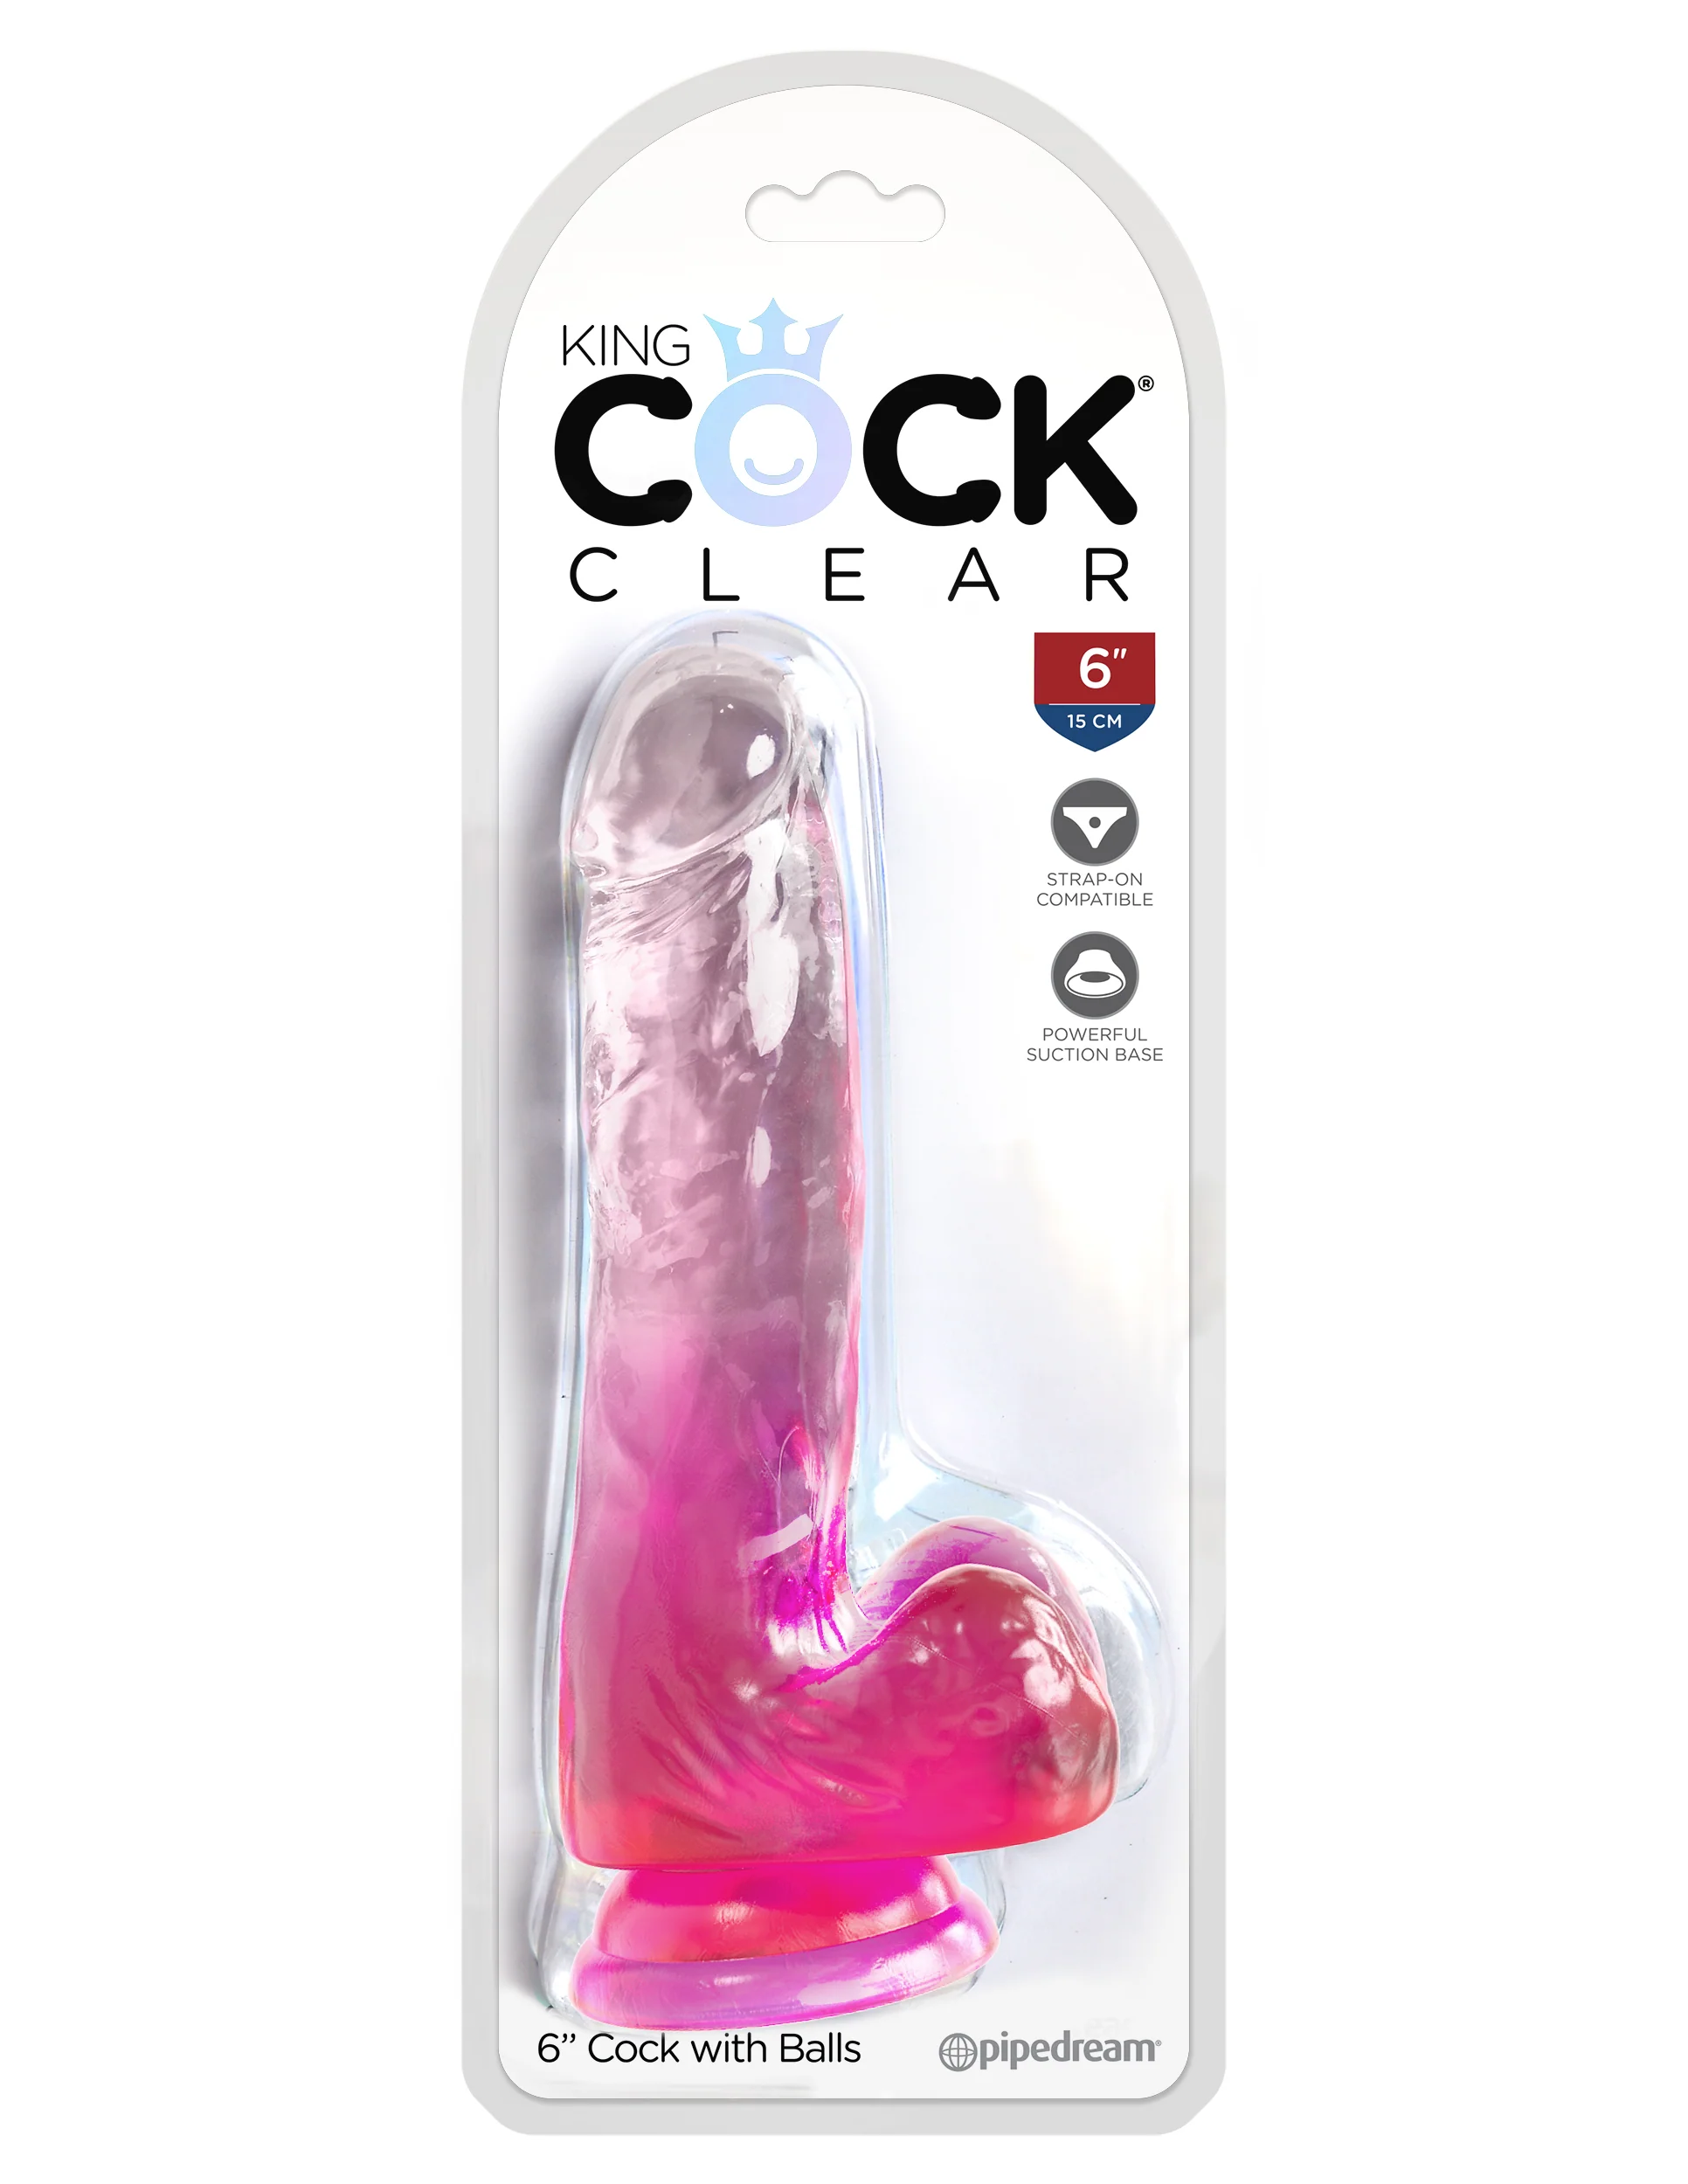       King Cock Clear 6, 